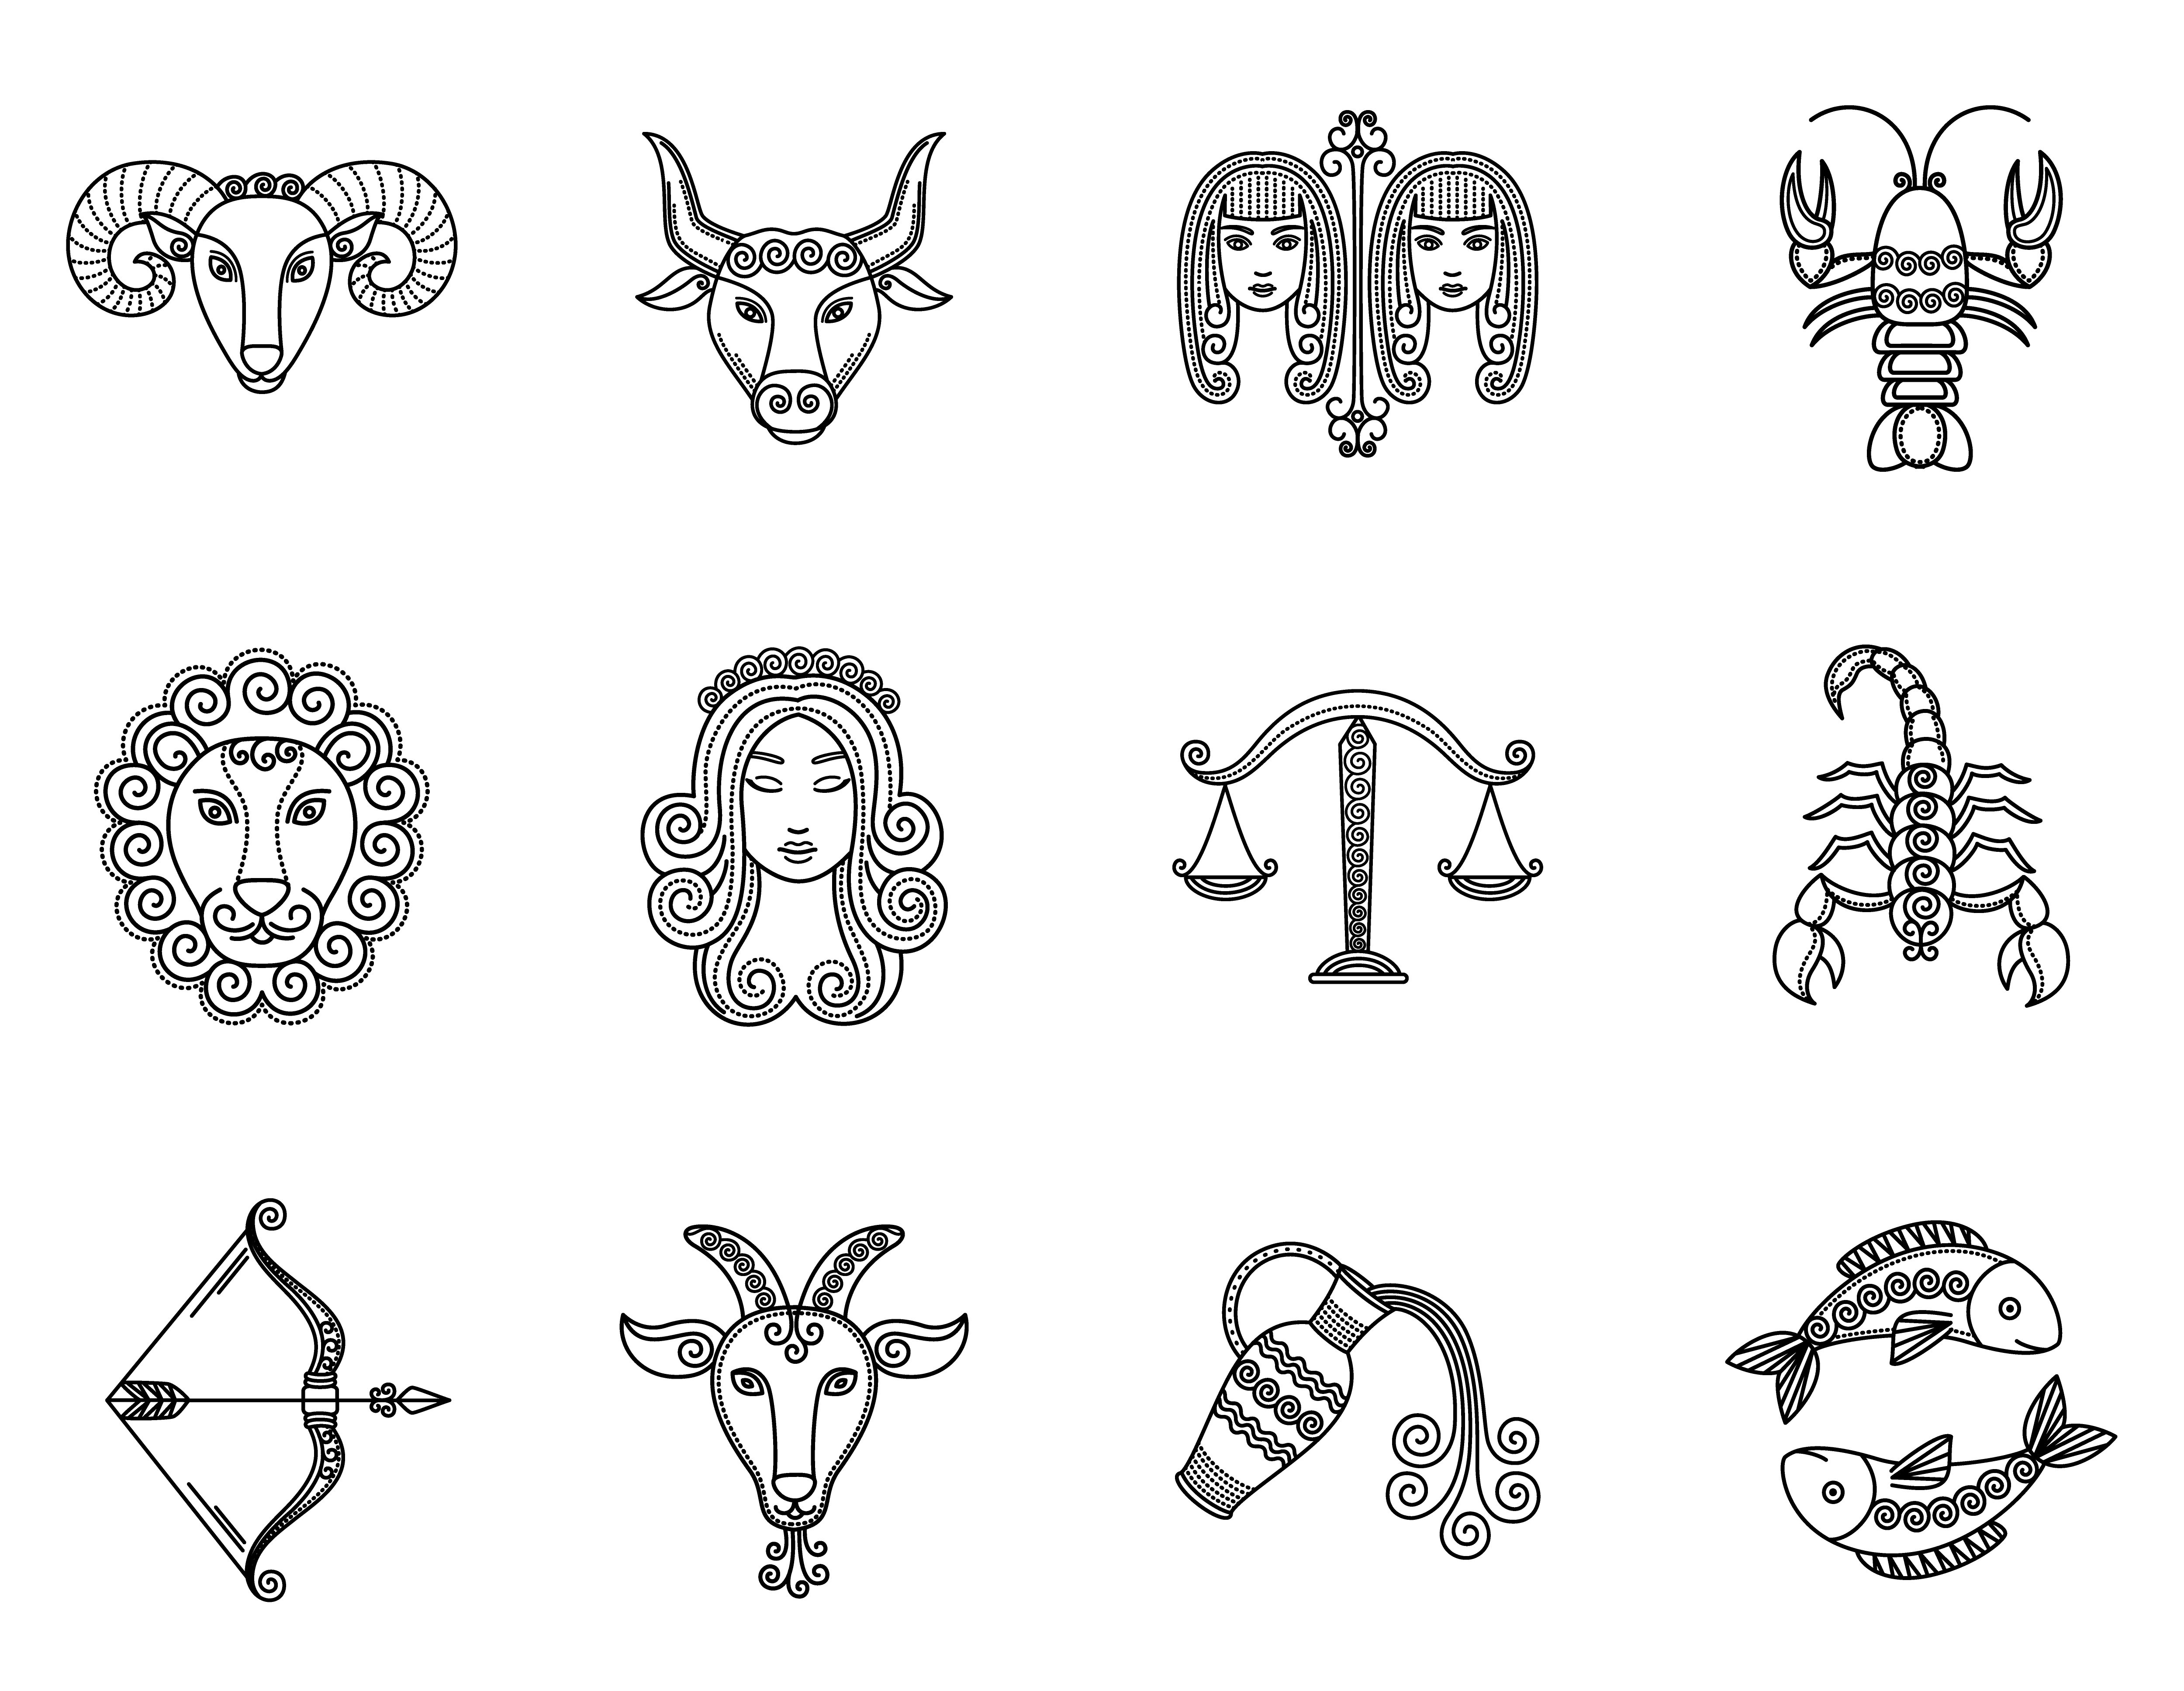 Twelve astrological signs that associated with constellation. Aquarius and gemini, virgo and scorpio, cancer and taurus, aries and libra, leo and pisces, capricort and sagittarius. Vector illustration. Twelve Astrological Signs, Symbols of Zodiacs